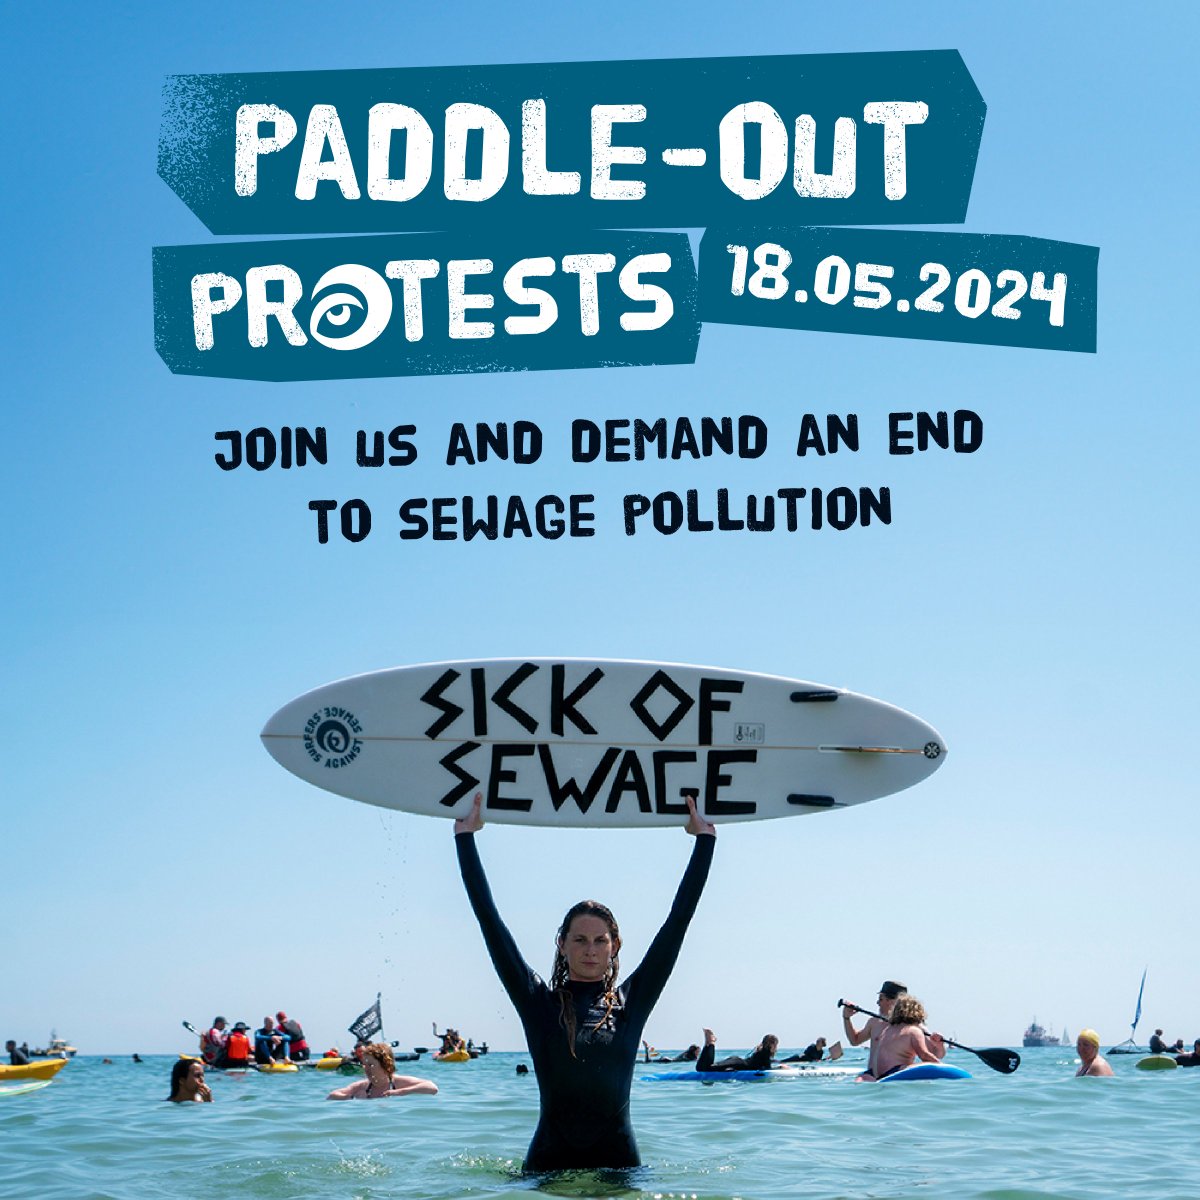 Less than 2 weeks until @sascampaigns Big Paddle Out🏄 Paddle out for waterways across the country, with protests in a variety of locations🚣 As we approach a General Election it's the perfect time to show that we want better for our waters Sign up👇 sas.org.uk/water-quality/…